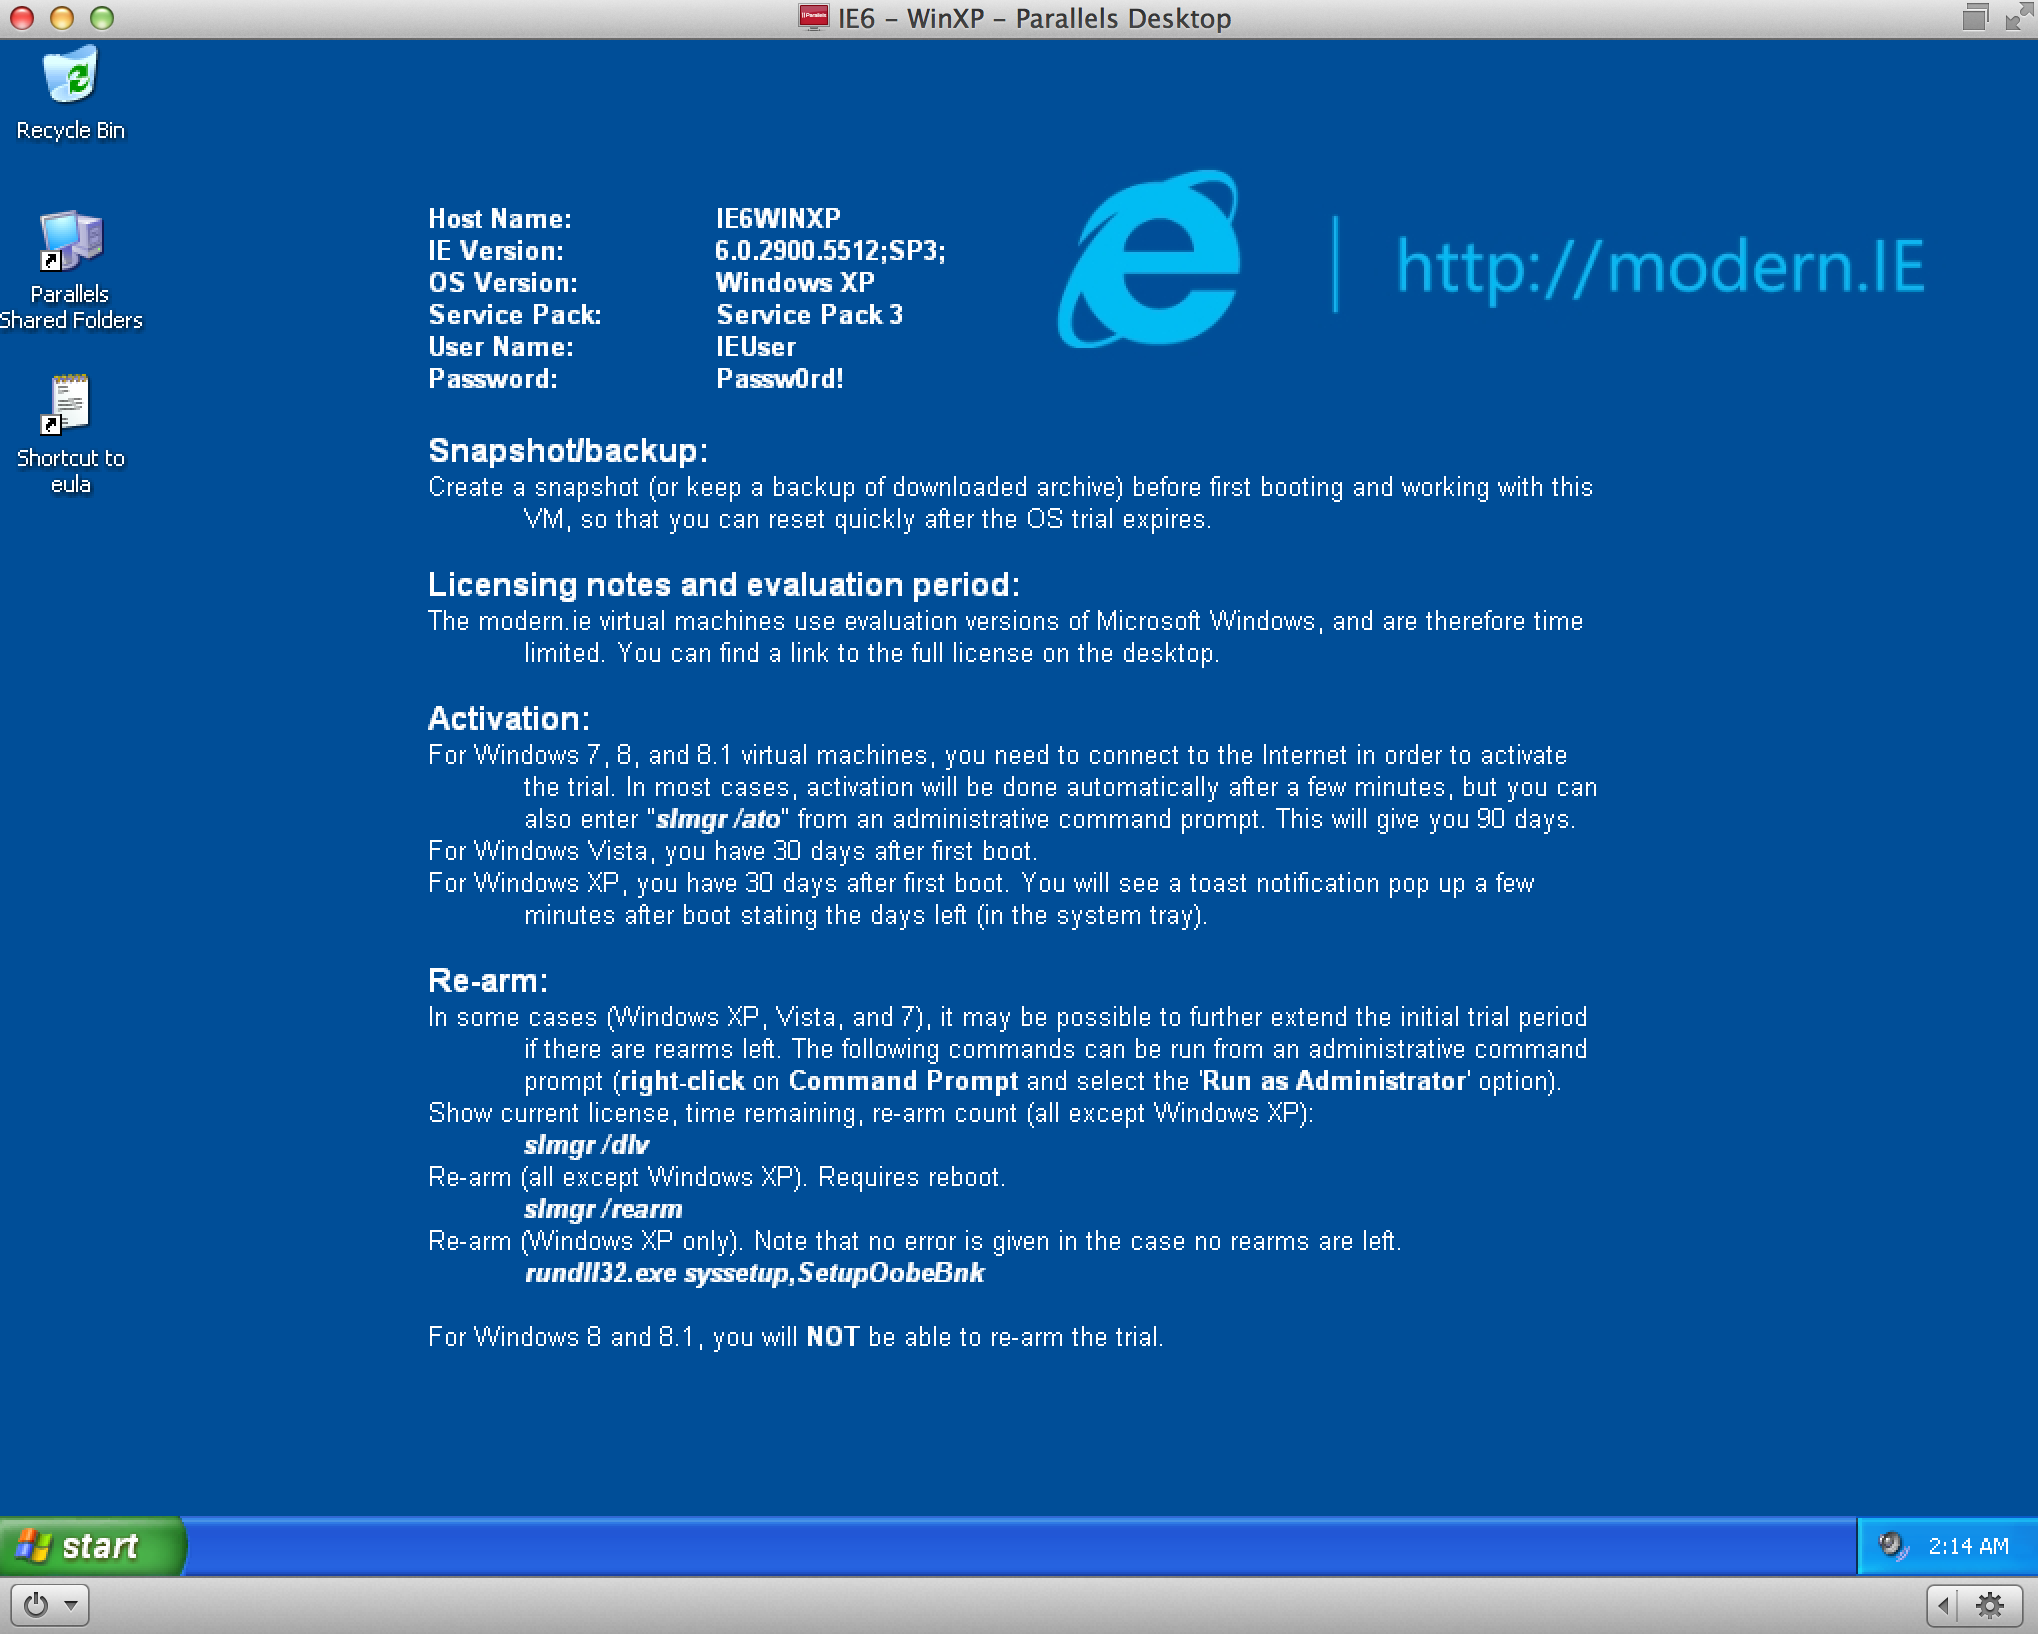 Windows XP and IE6